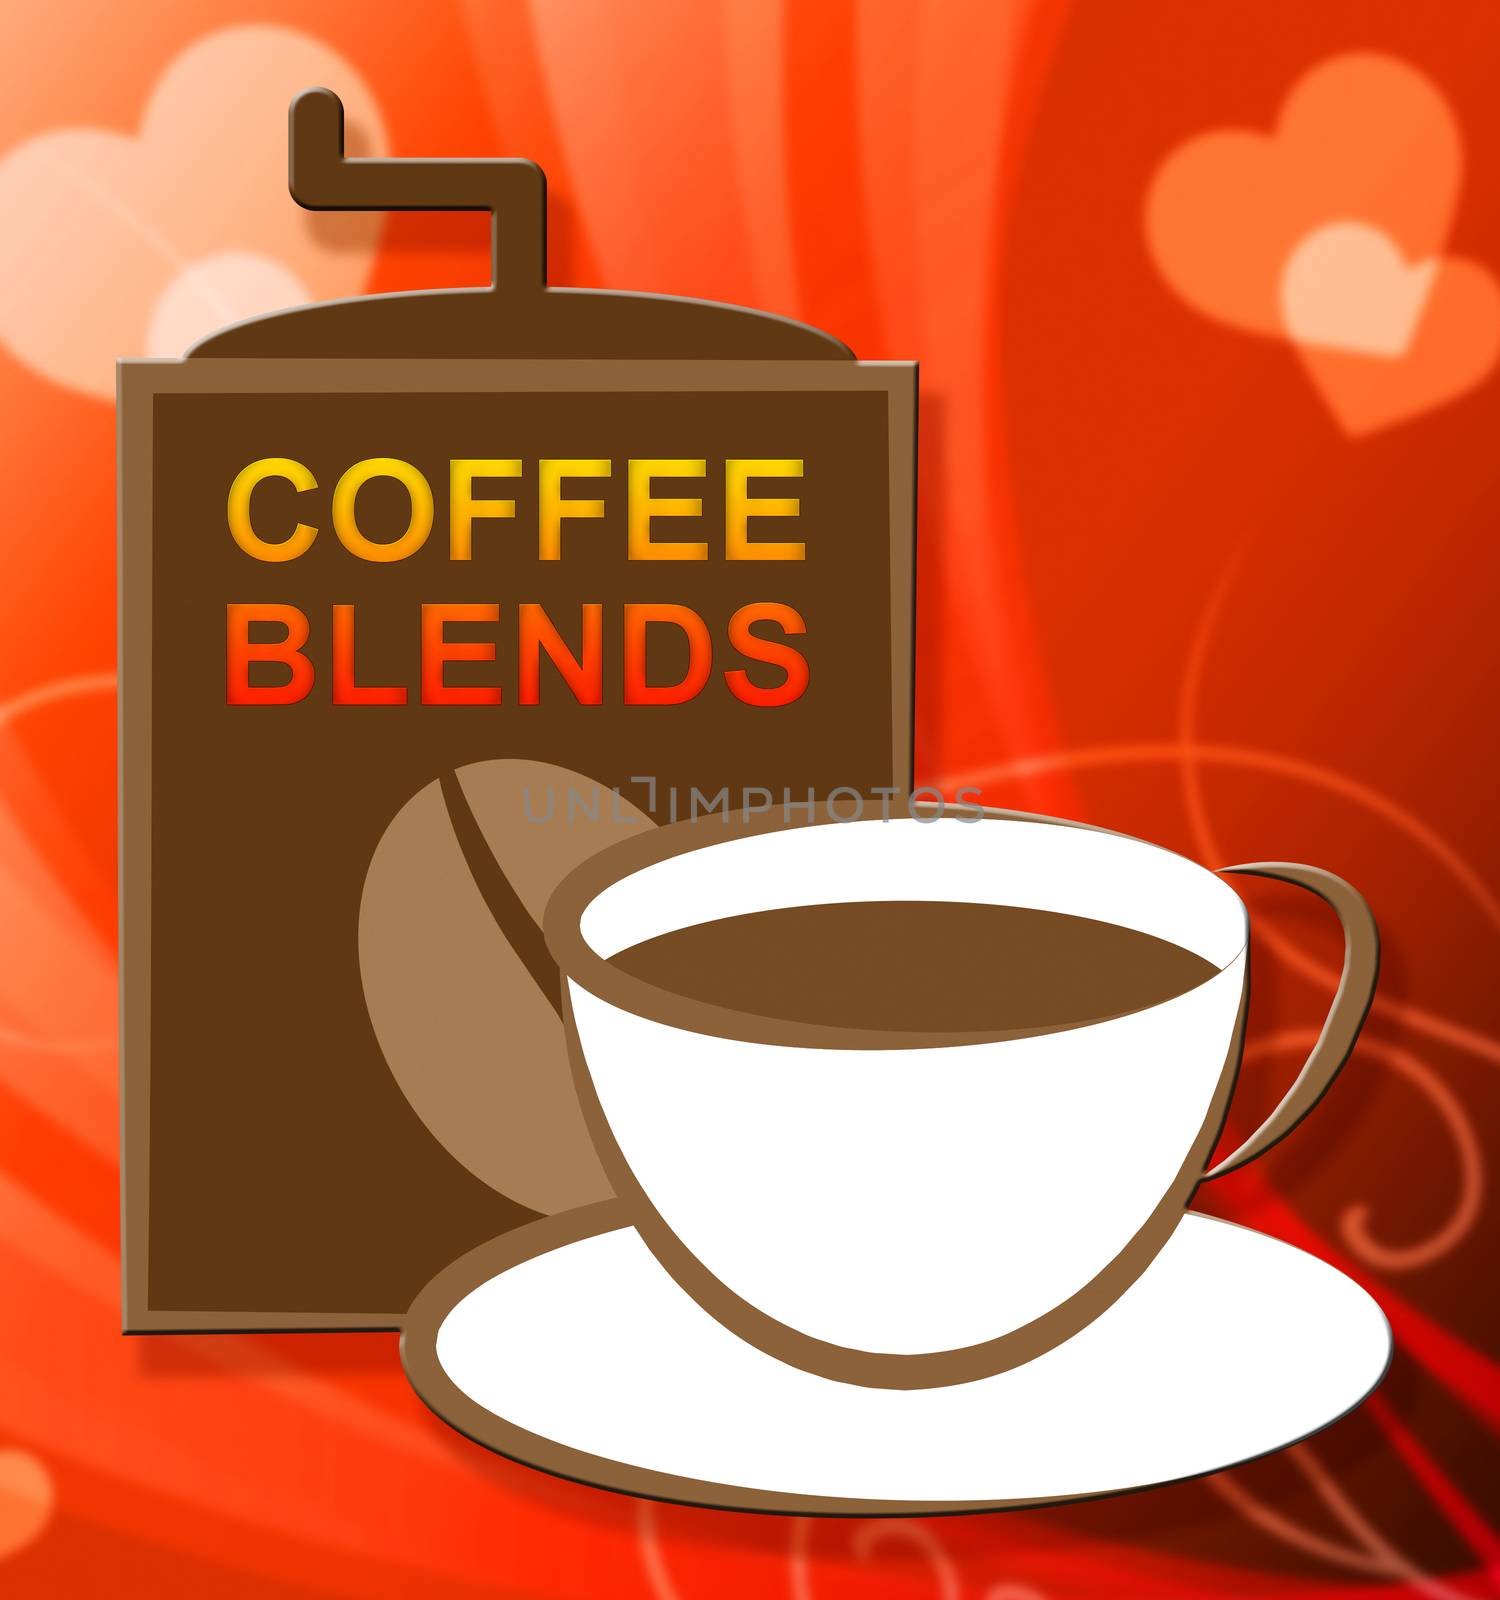 Coffee Blends Representing Blended Mixture or Types by stuartmiles